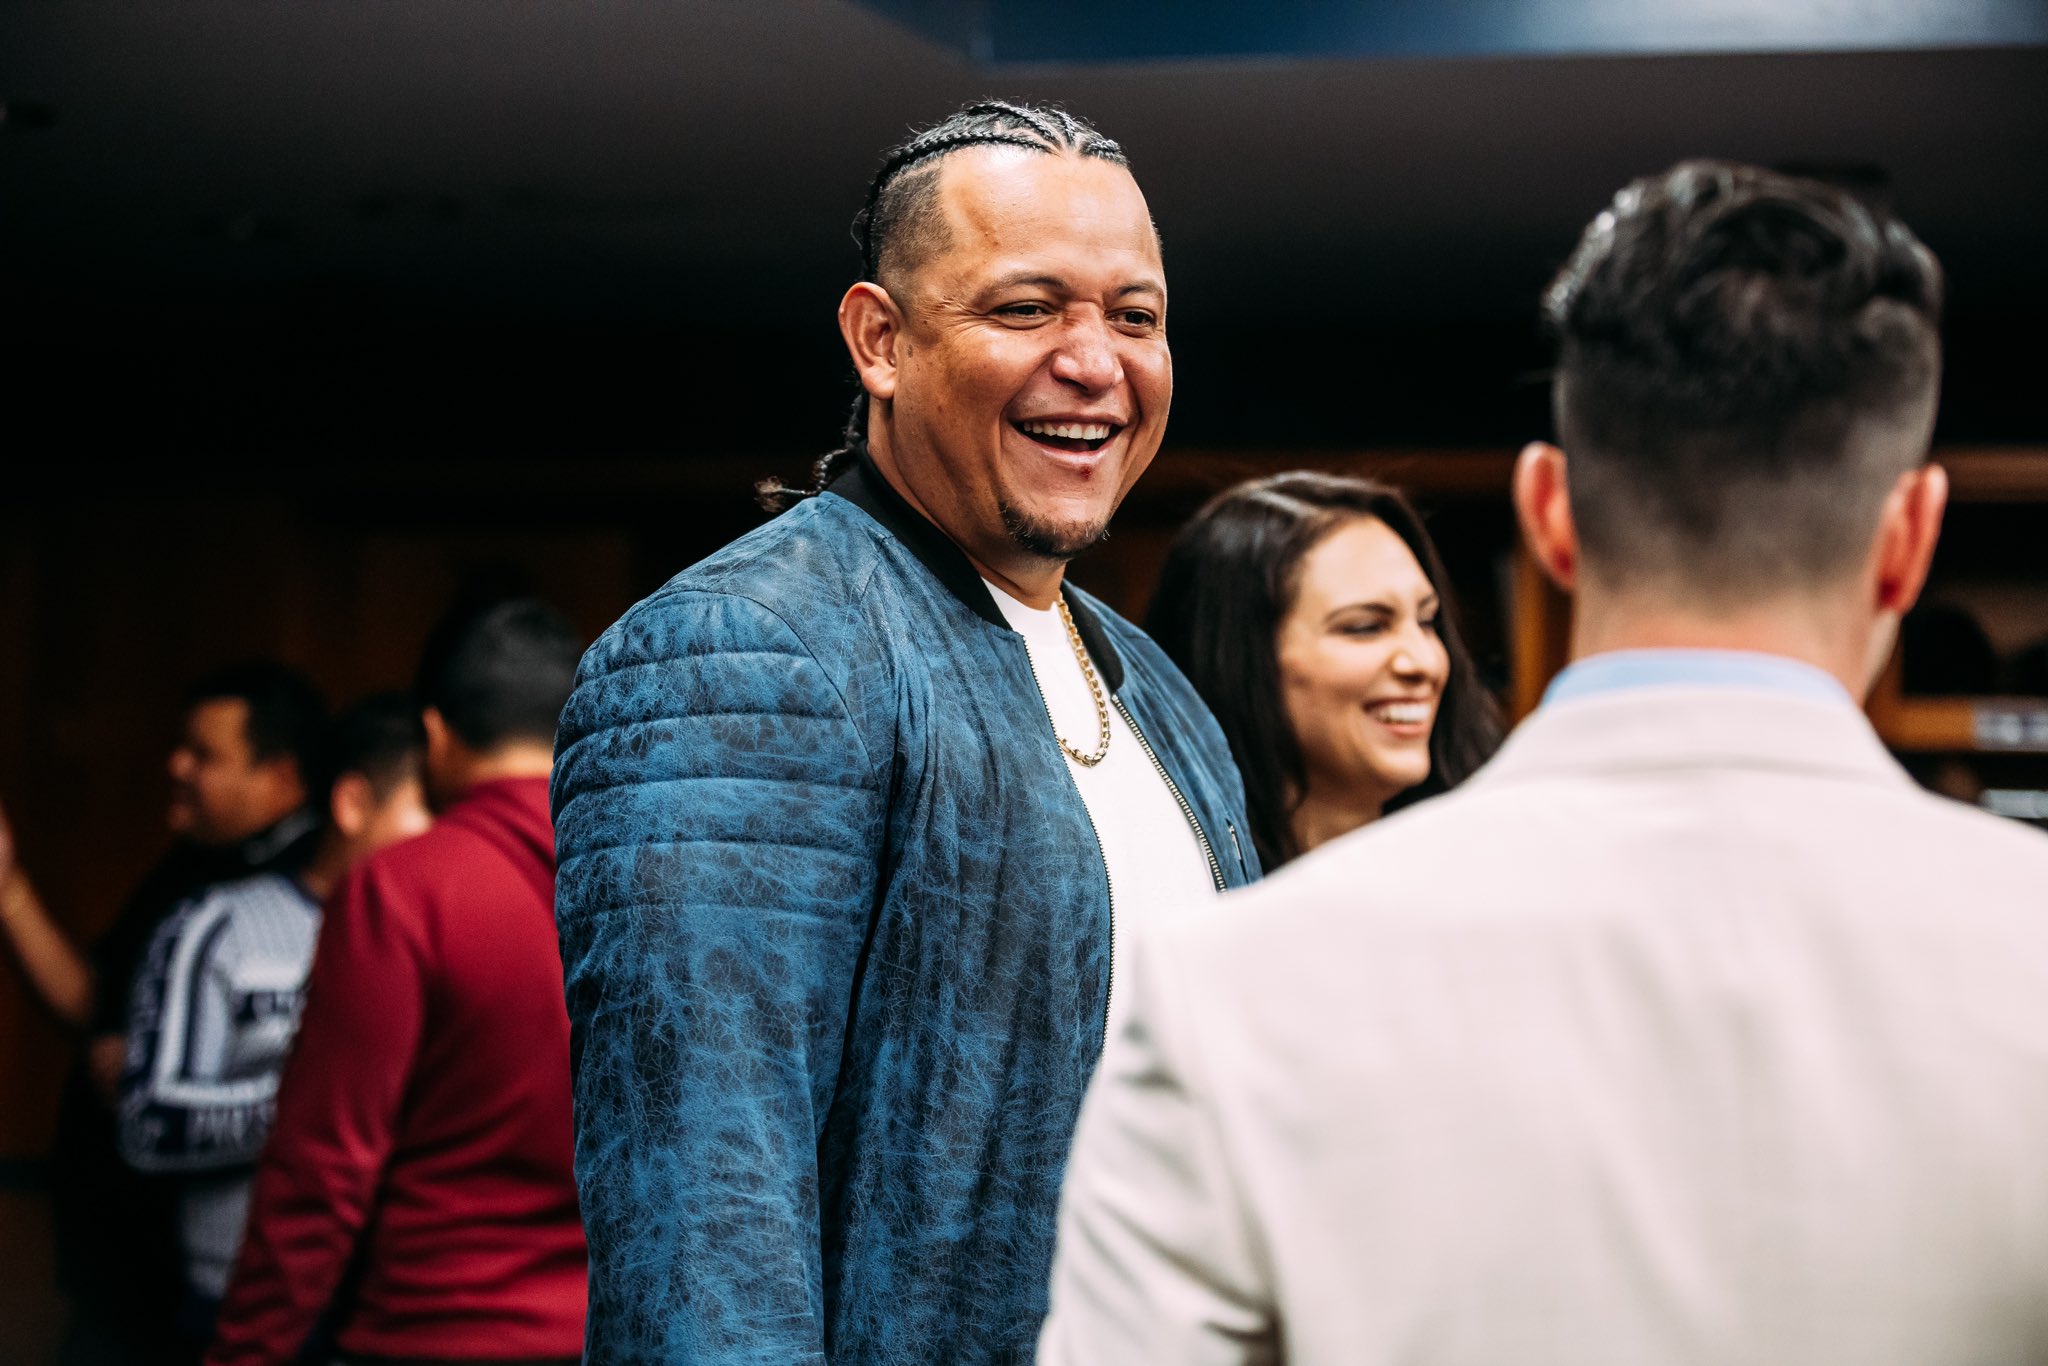 Detroit Tigers Community Impact on X: As the host of Keeping Kids in the  Game since 2011, Miguel Cabrera has helped raise over $3 million to benefit  children's health initiatives and youth